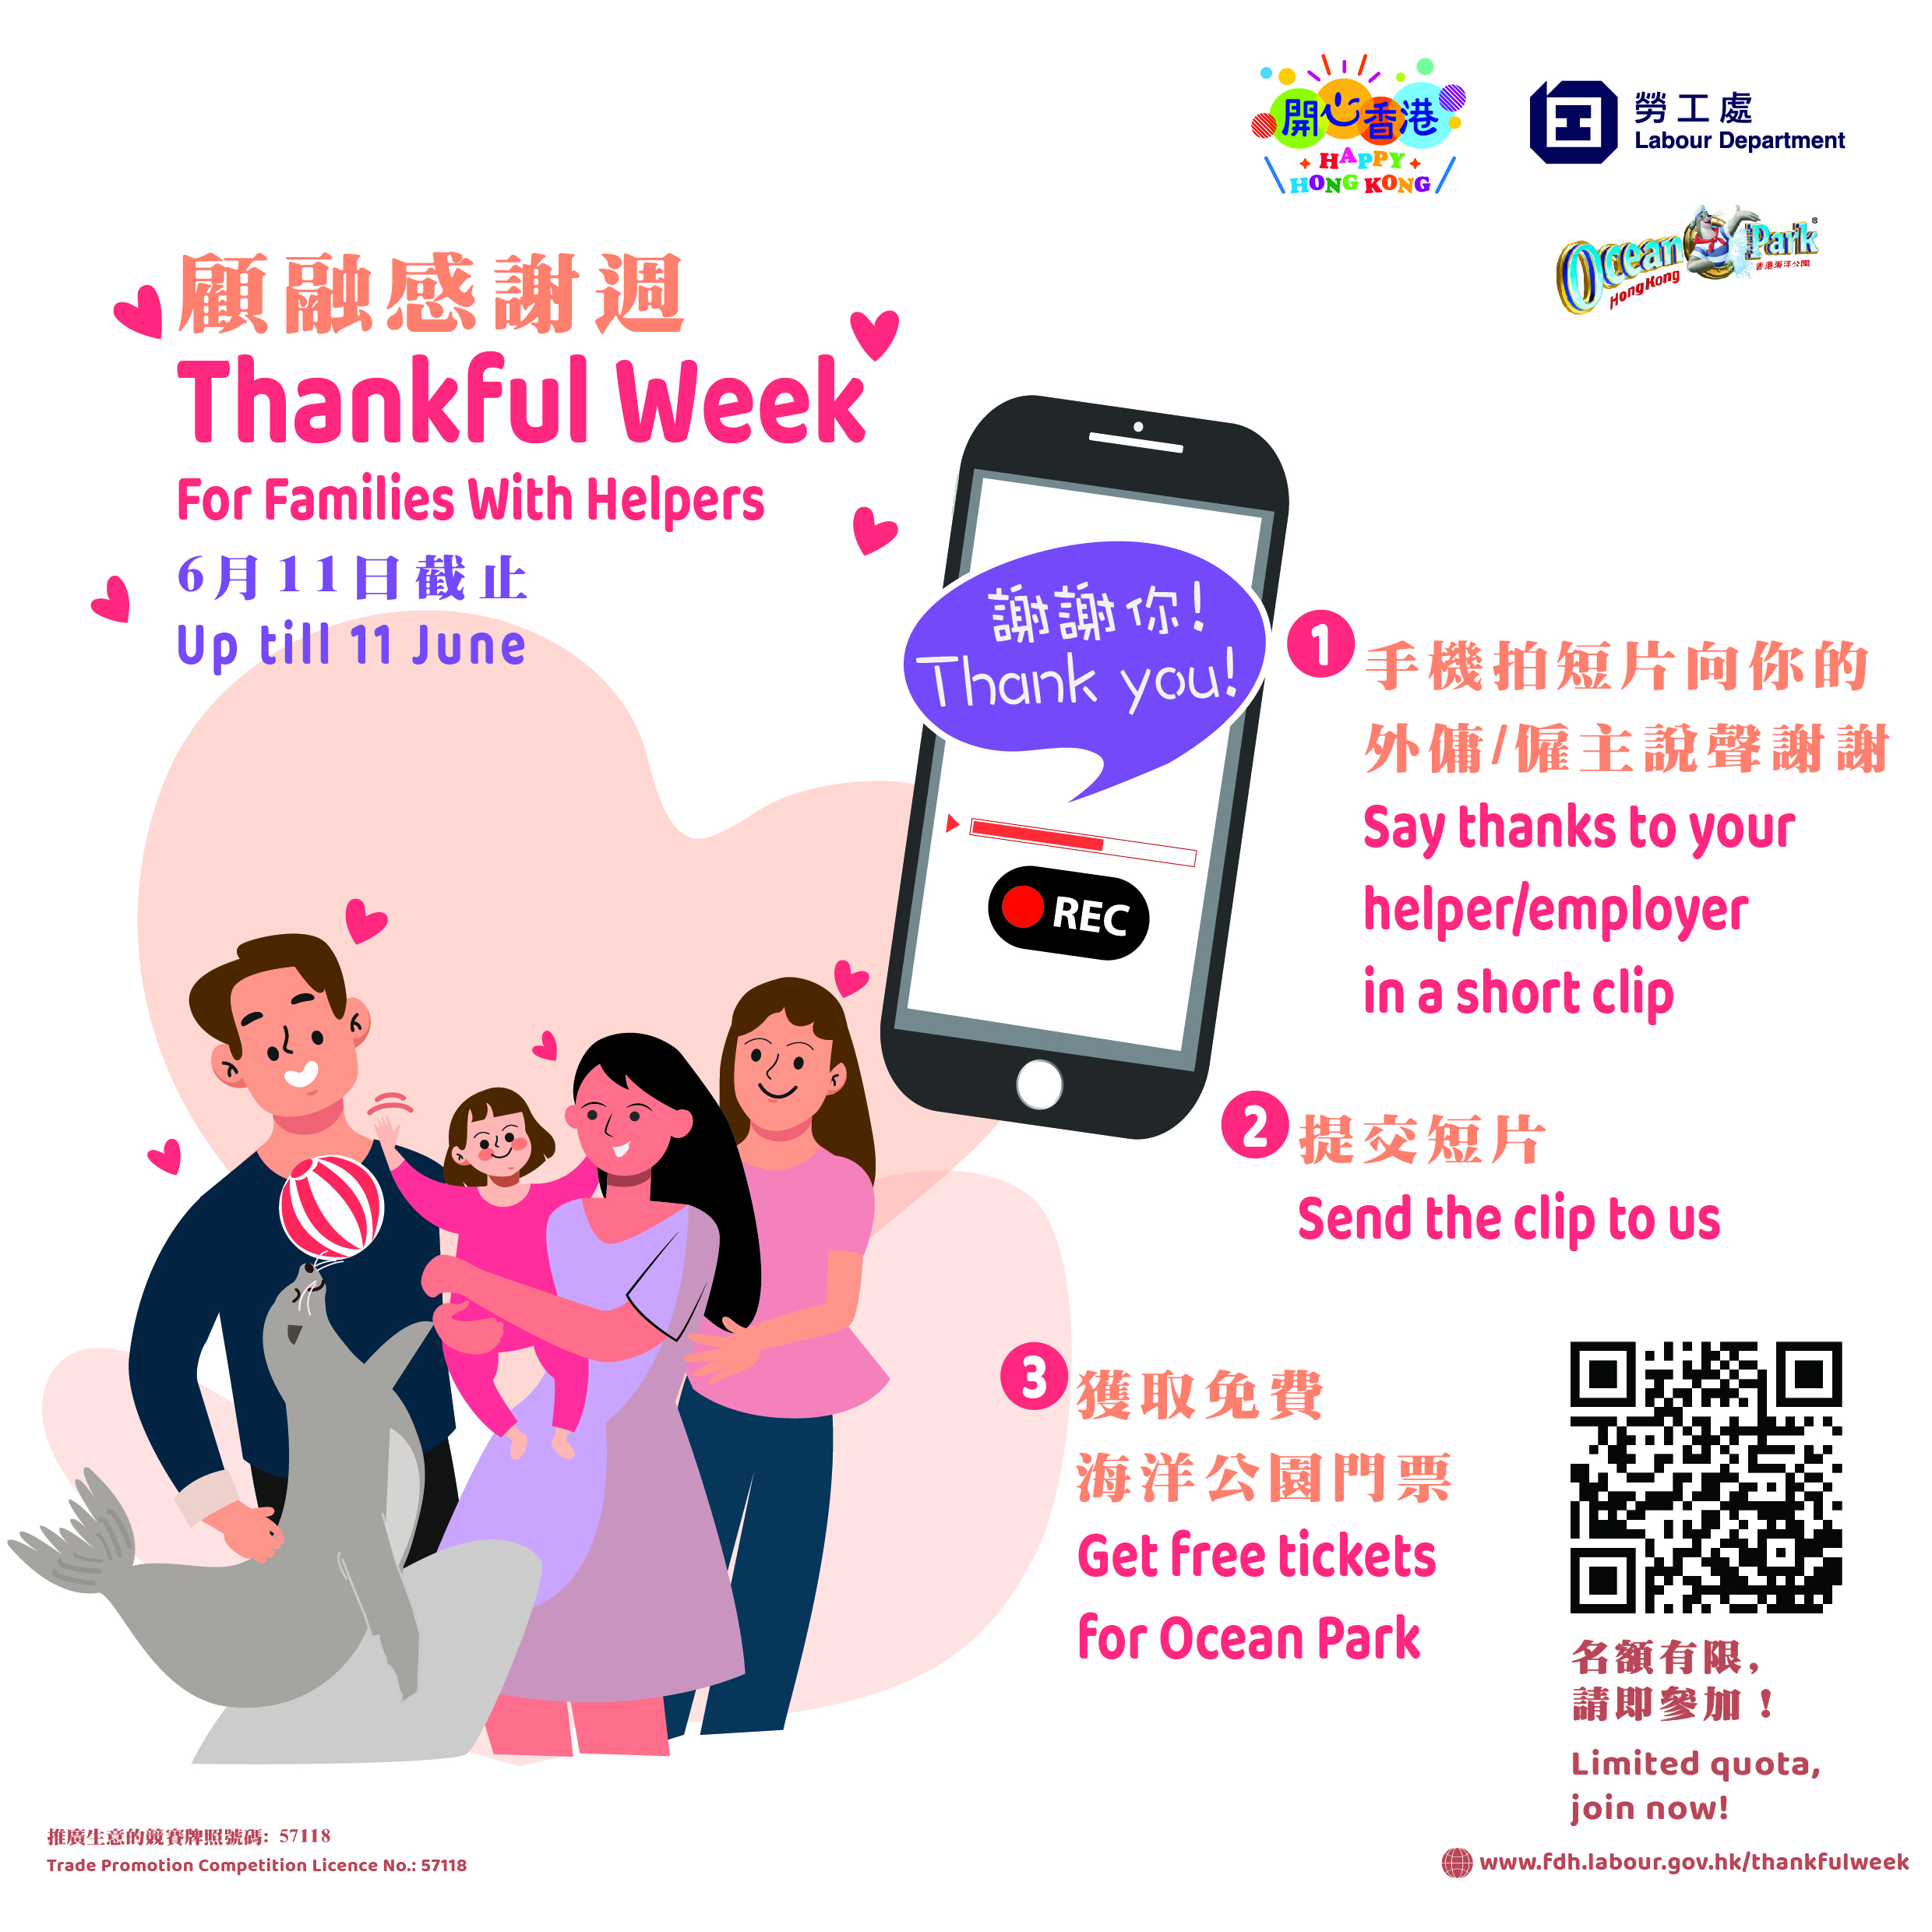 Thankful Week for Families with Foreign Domestic Helpers (FDHs)